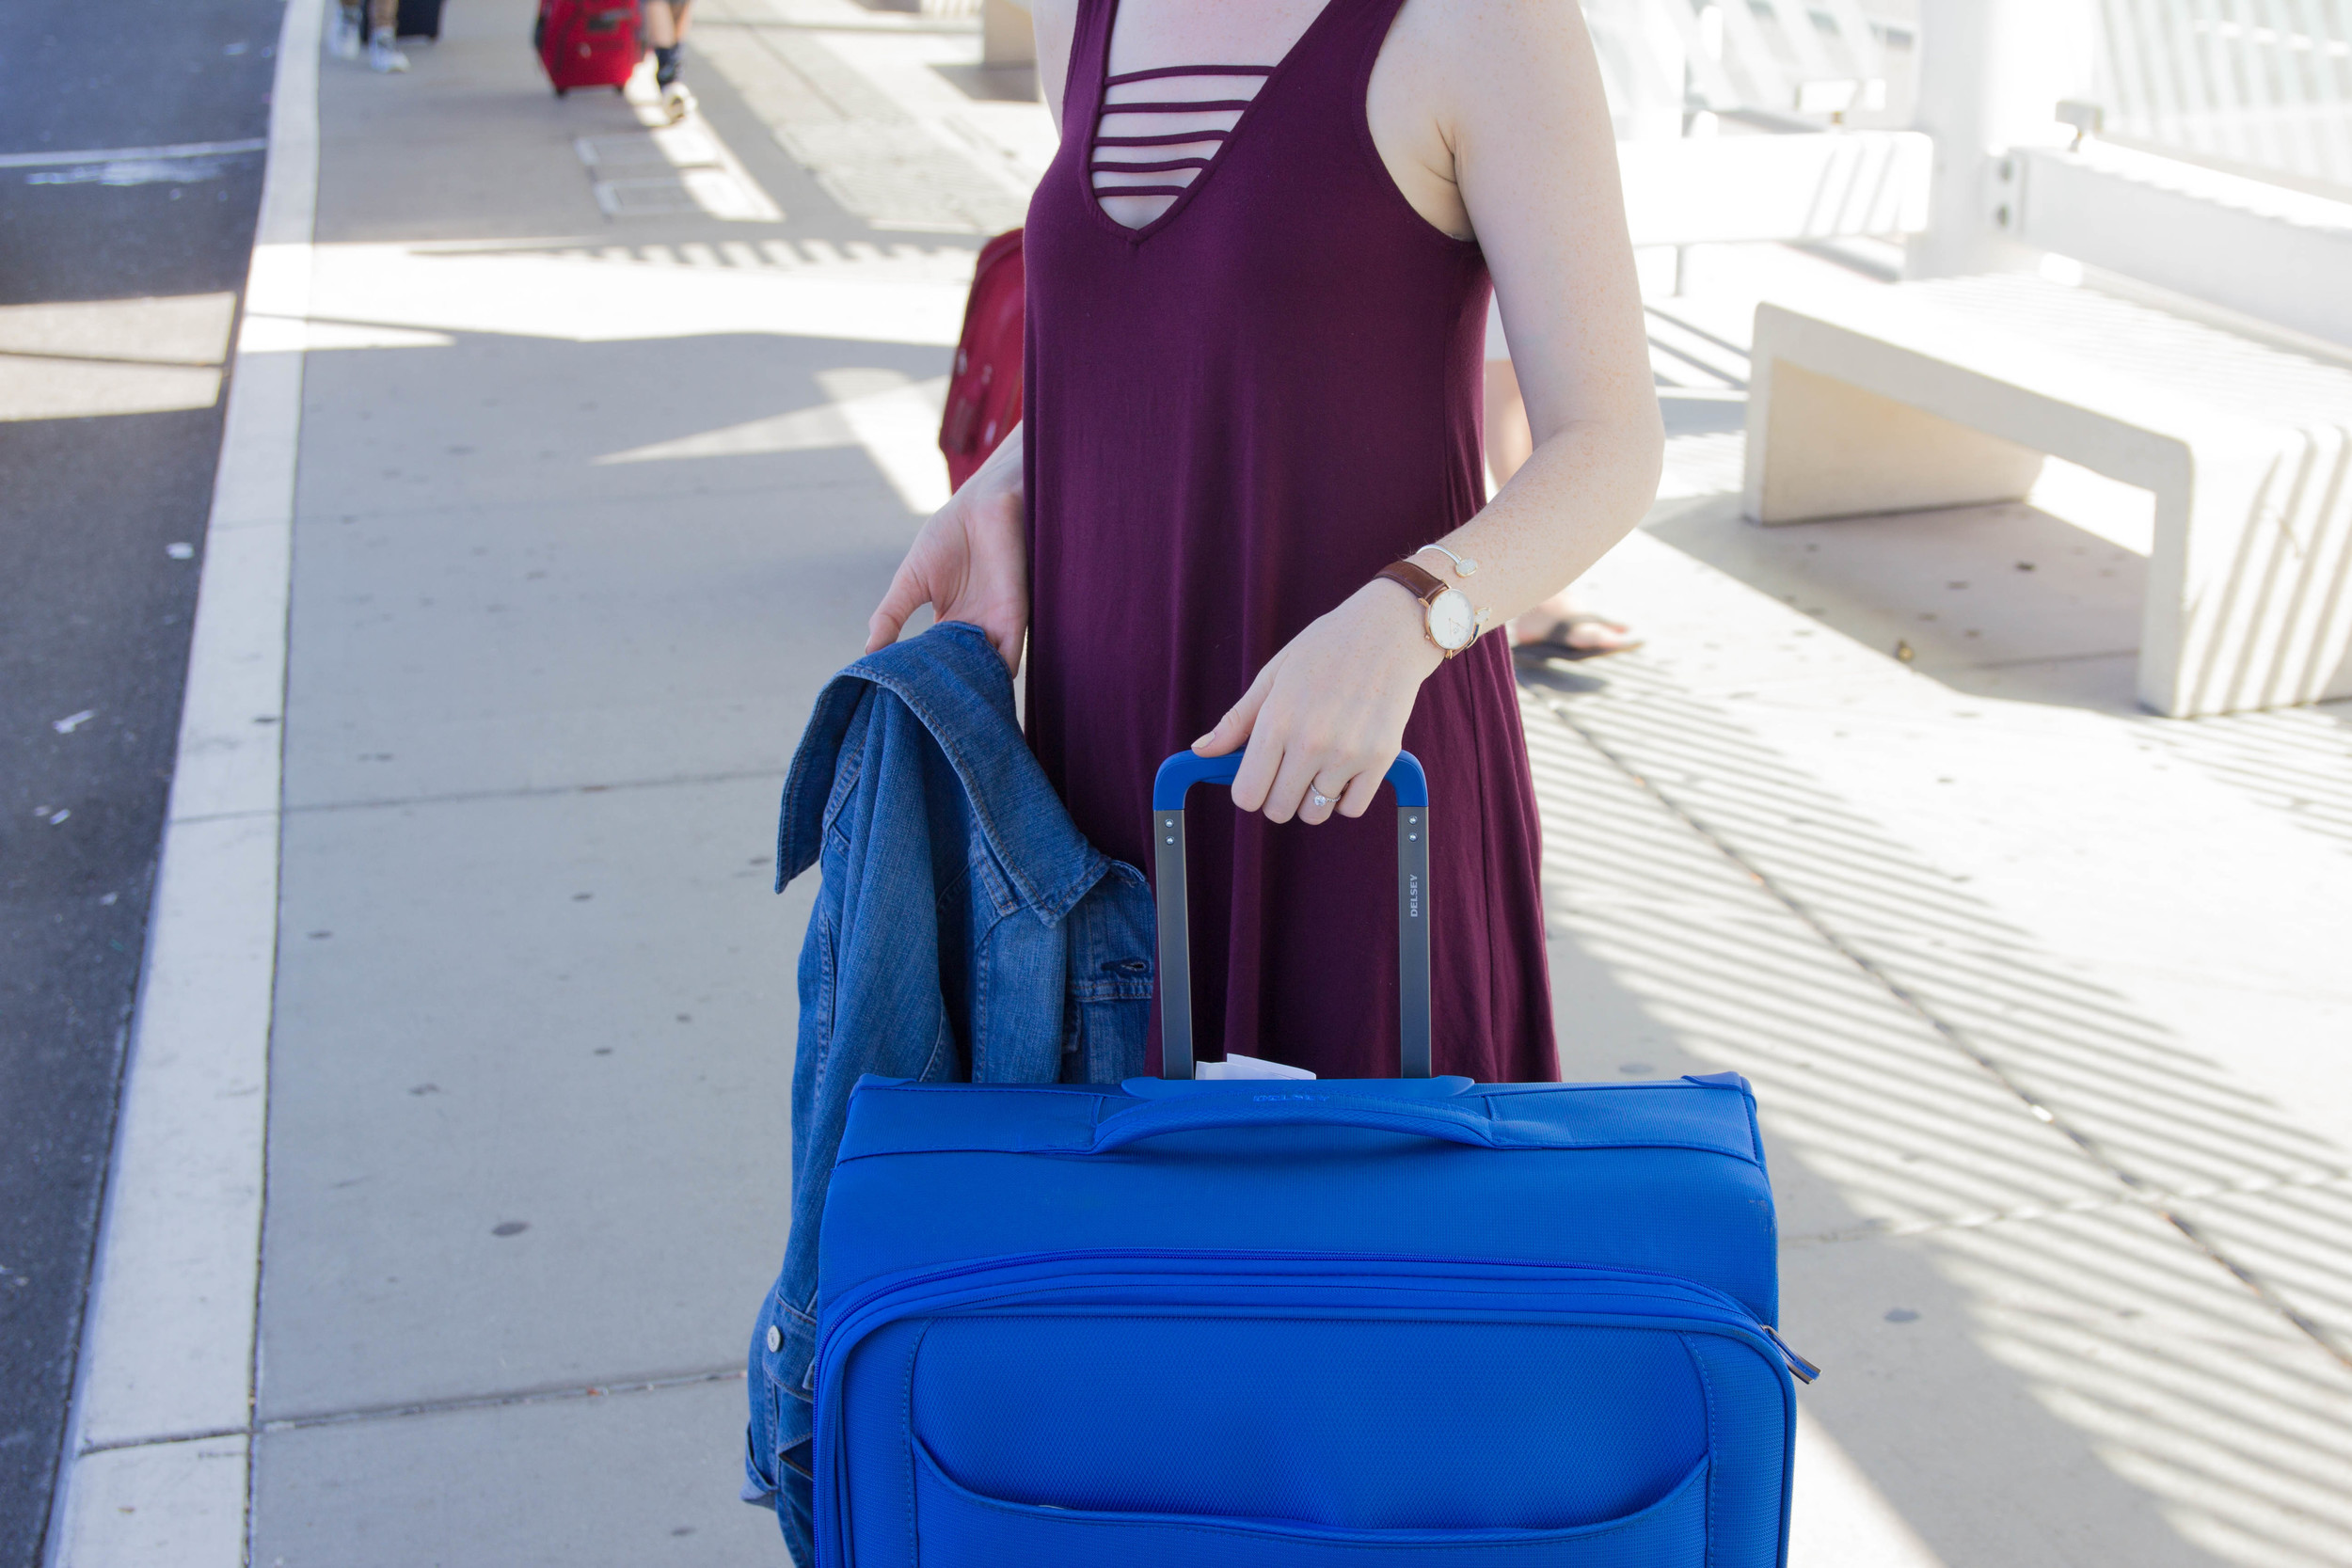 Delsey Chatillon Luggage, What is the best luggage to use for travel, nordstrom strappy tank dress, levi's denim jacket, kendra scott elton cuff, sophee earrings, daniel wellington watch, san francisco, california, packing hacks